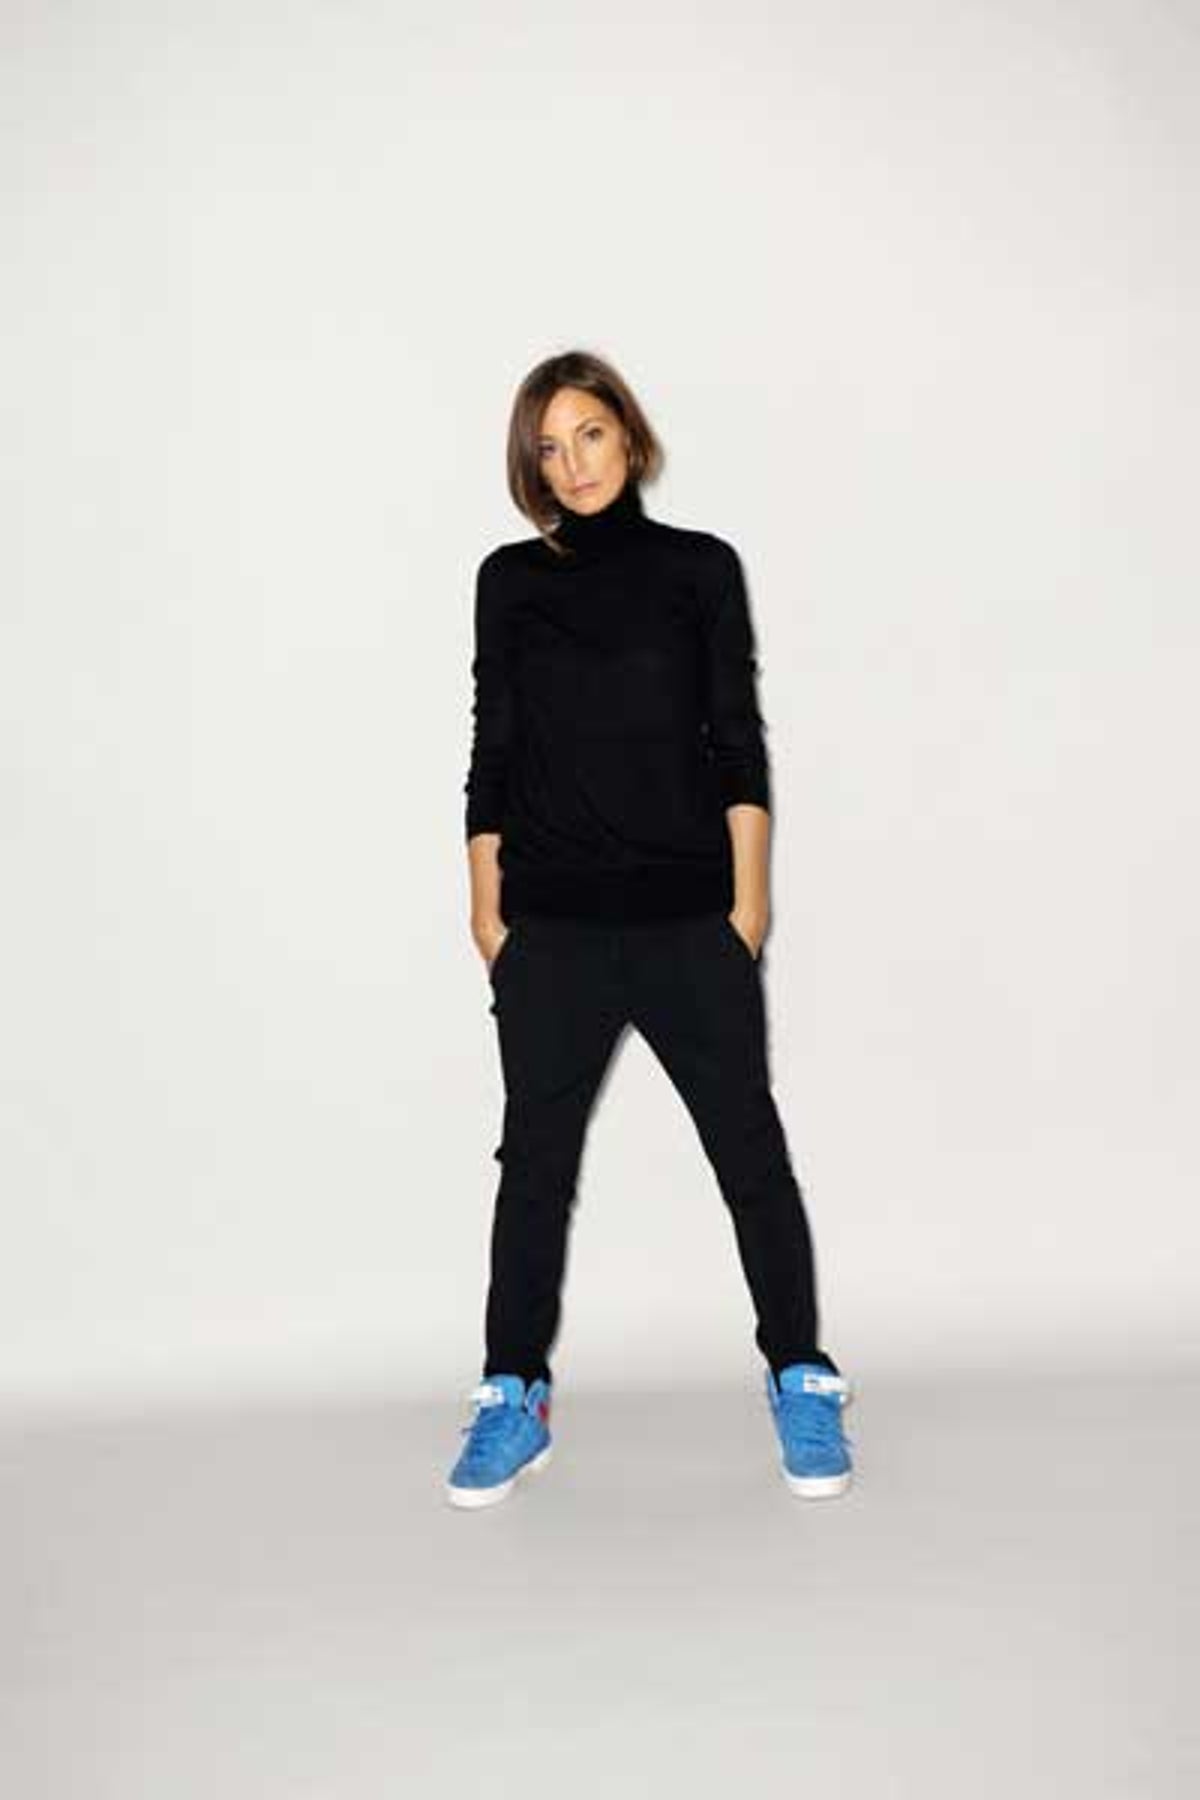 Phoebe Philo: The British fashion designer who is leading the pack, The  Independent